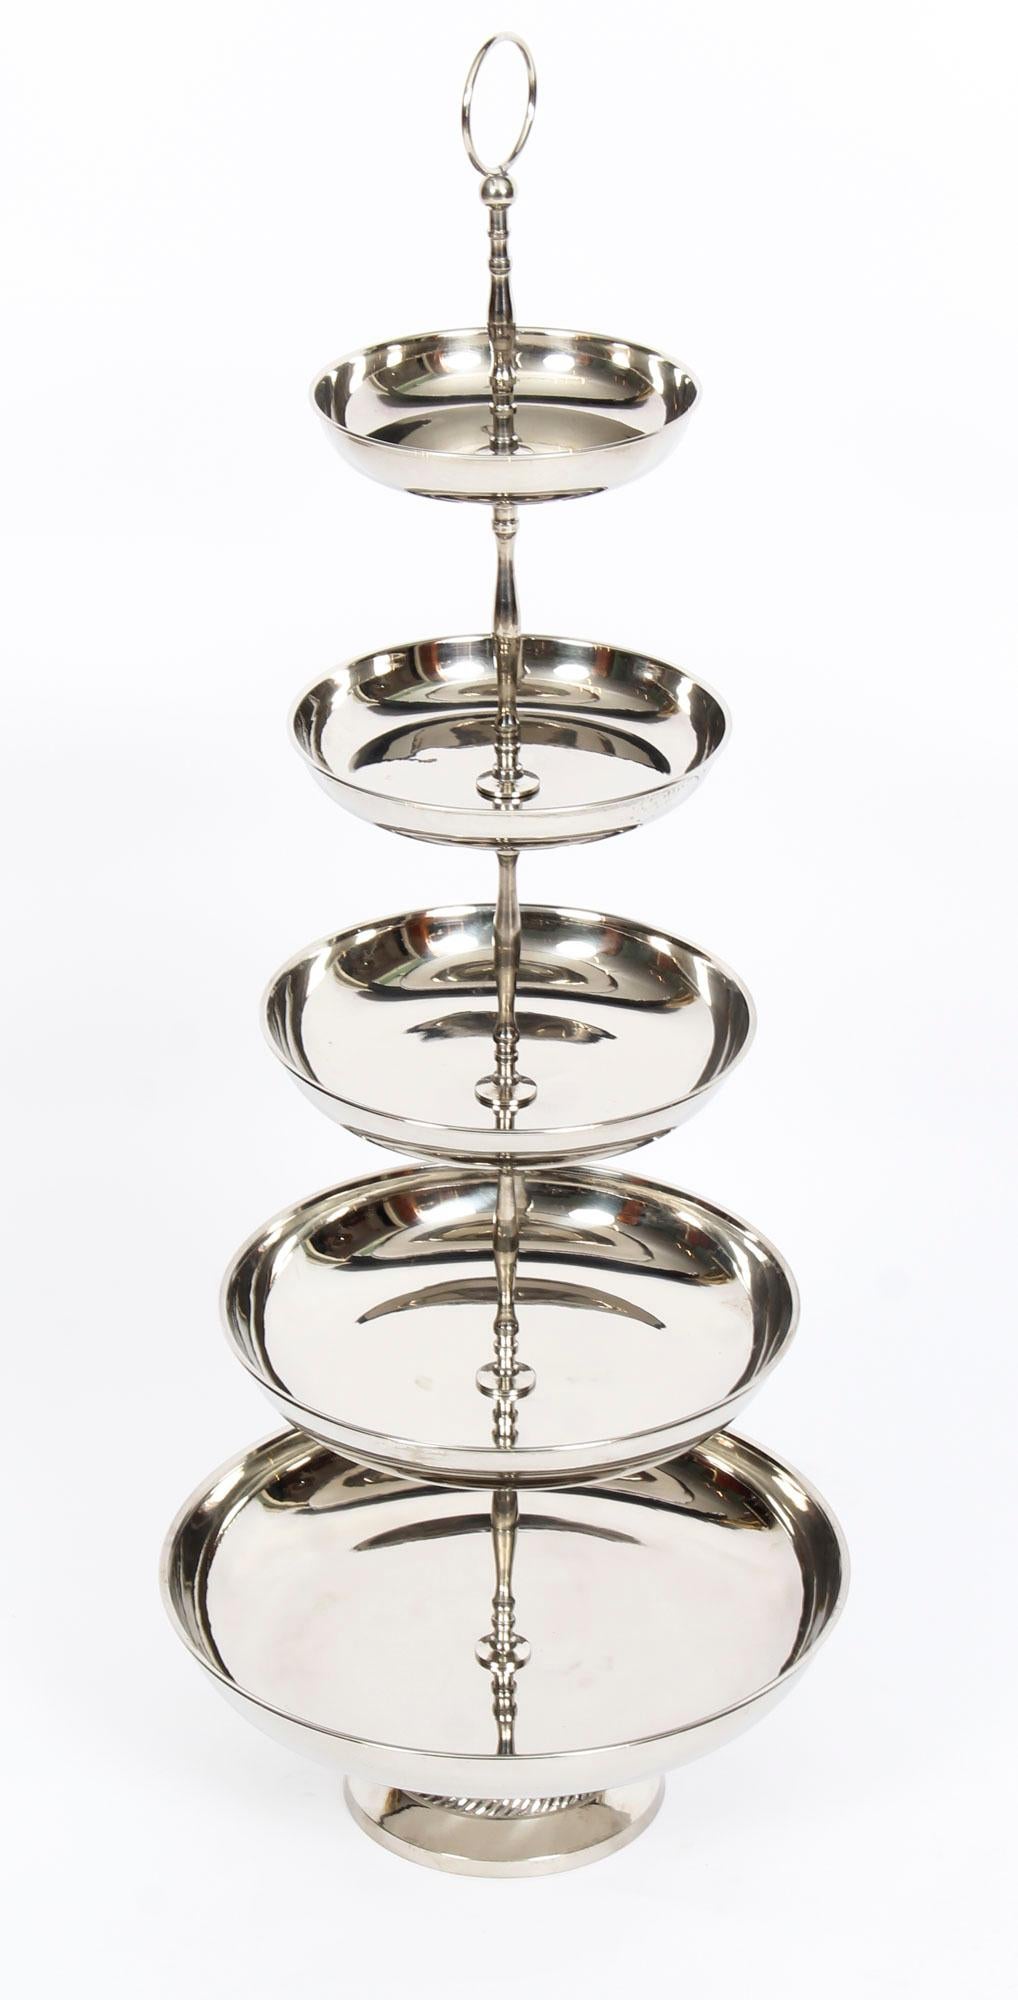 This is a delightful silver plated cake stand, ideal for displaying your cup cakes or confectionary.

There is no mistaking the high quality and superb design, which is certain to make it a useful as well as a beautiful addition to your tableware